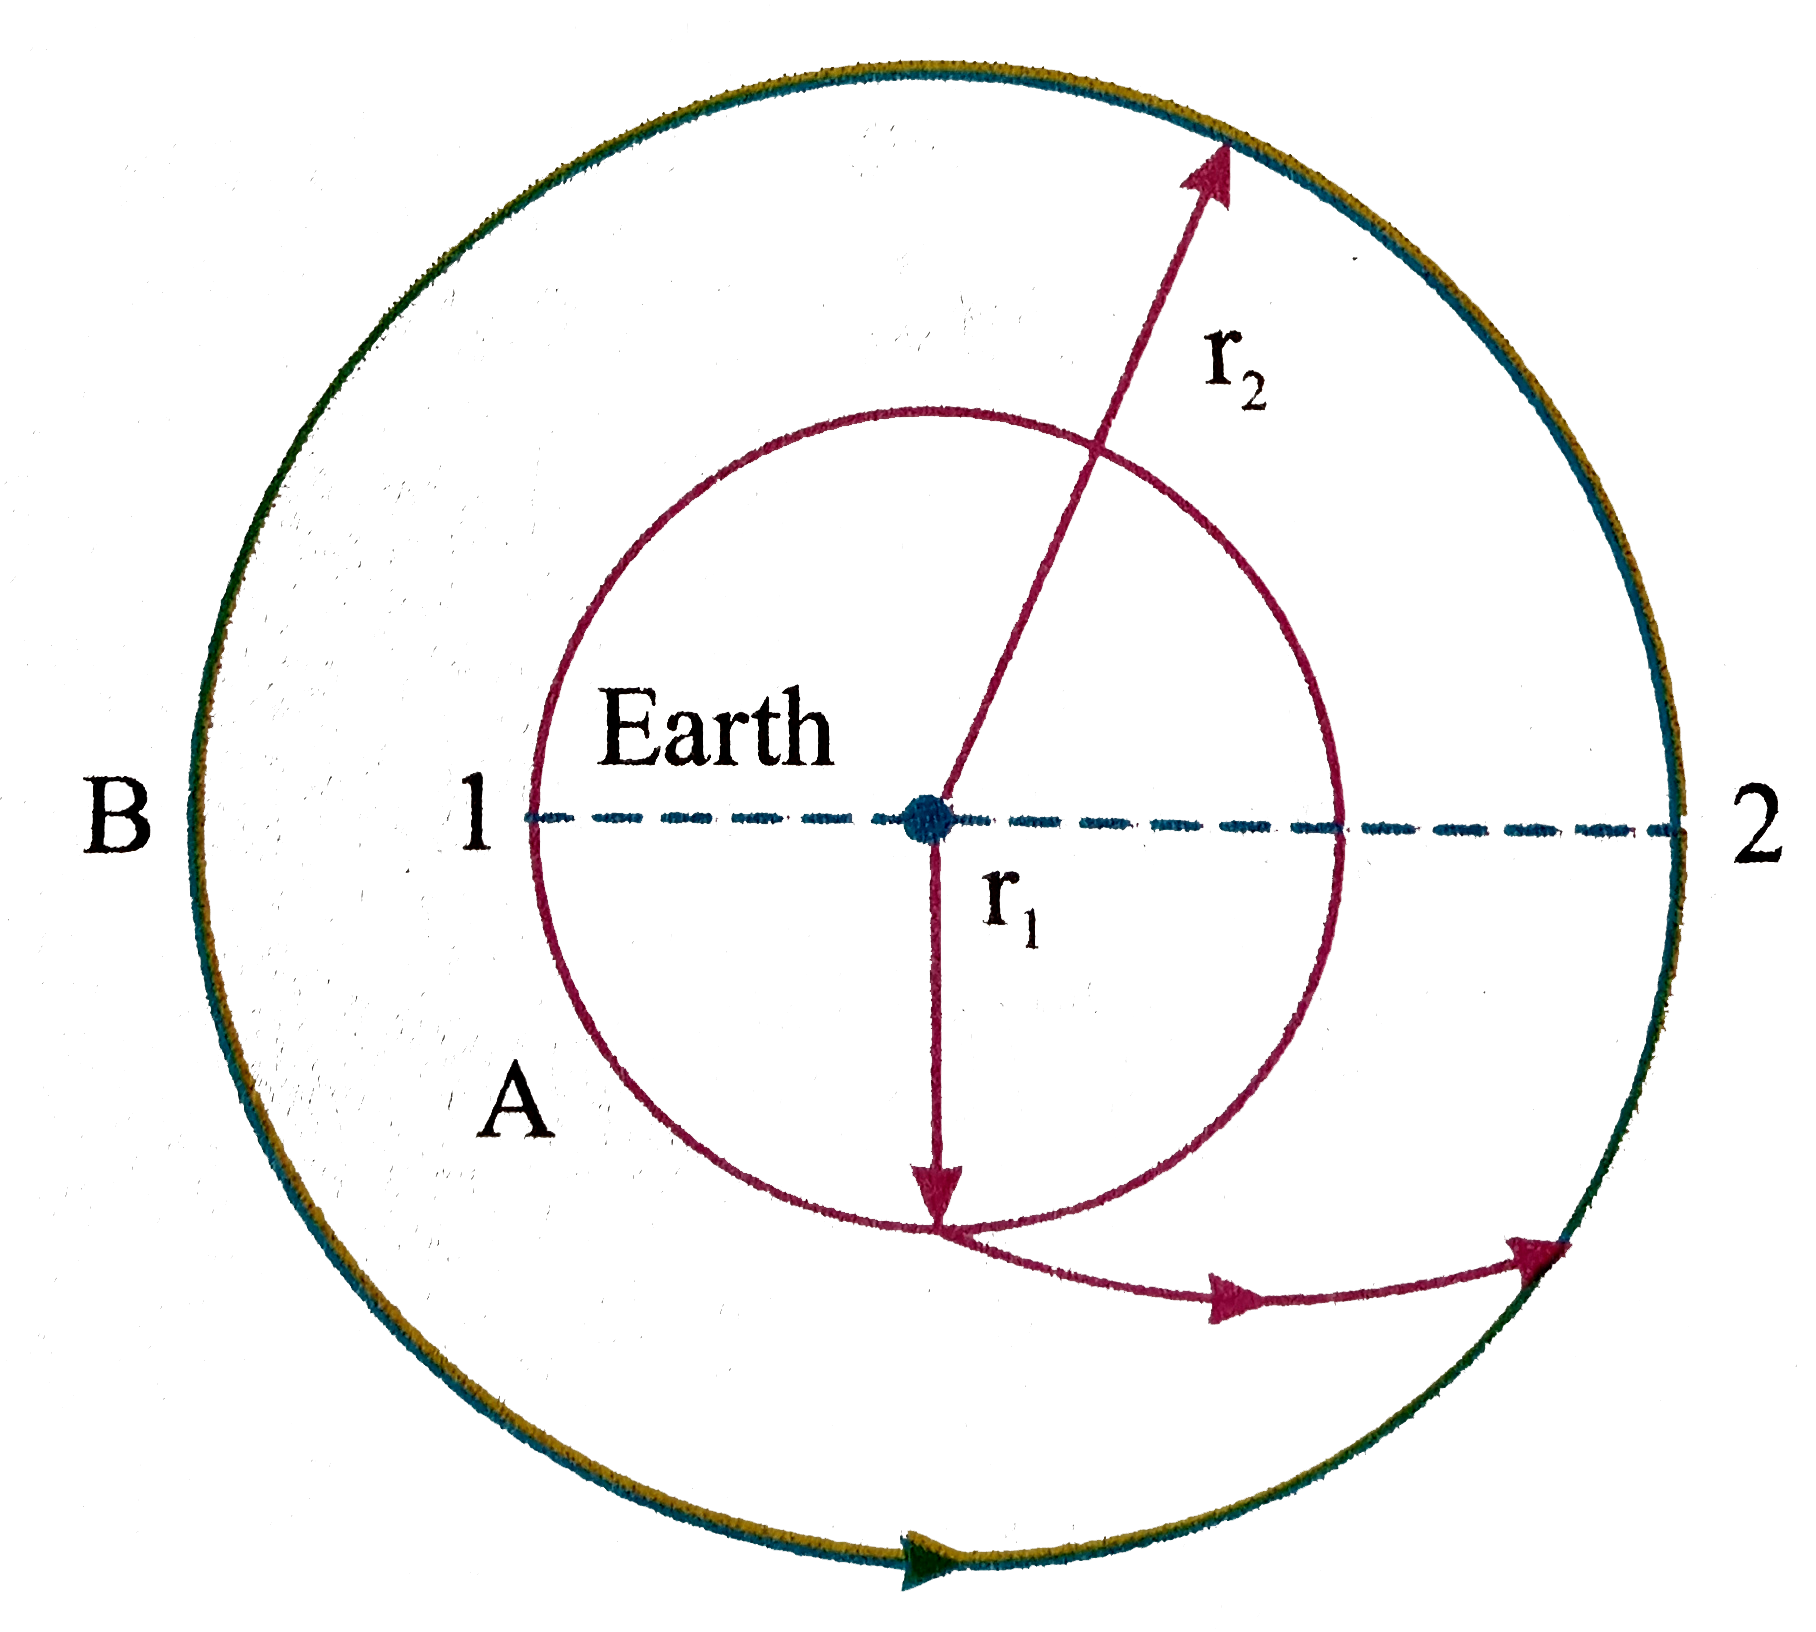 Two satellites A and B are revolving around the earth in circular orbits of radius r(1) and r(2) respectively with r(1)ltr(2). Plane of motion of the two are same. At position 1, A is given an impulse in the direction of velocity by firing a rocket so that it follows an elliptical path to meet B at position 2 as shown. focal lengths of the elliptical path are r(1) and r(2) respectively. at position 2, A is given another impulse so that velocities of A and B at 2 become equal and the two move together. for any elliptical path of the satellite time period of revolution is given Kepler's planetry law as T^(2)alphar^(3) where a is semi-major axis of the ellipse which is (r(1)+r(2))/2 in this case. also angular momentum of any satellite revolving around the earth will remain a constant about earth's centre as force of gravity on the satellite which keeps it in elliptical path is given its position vector relative to the earth centre.   If the two have same mass